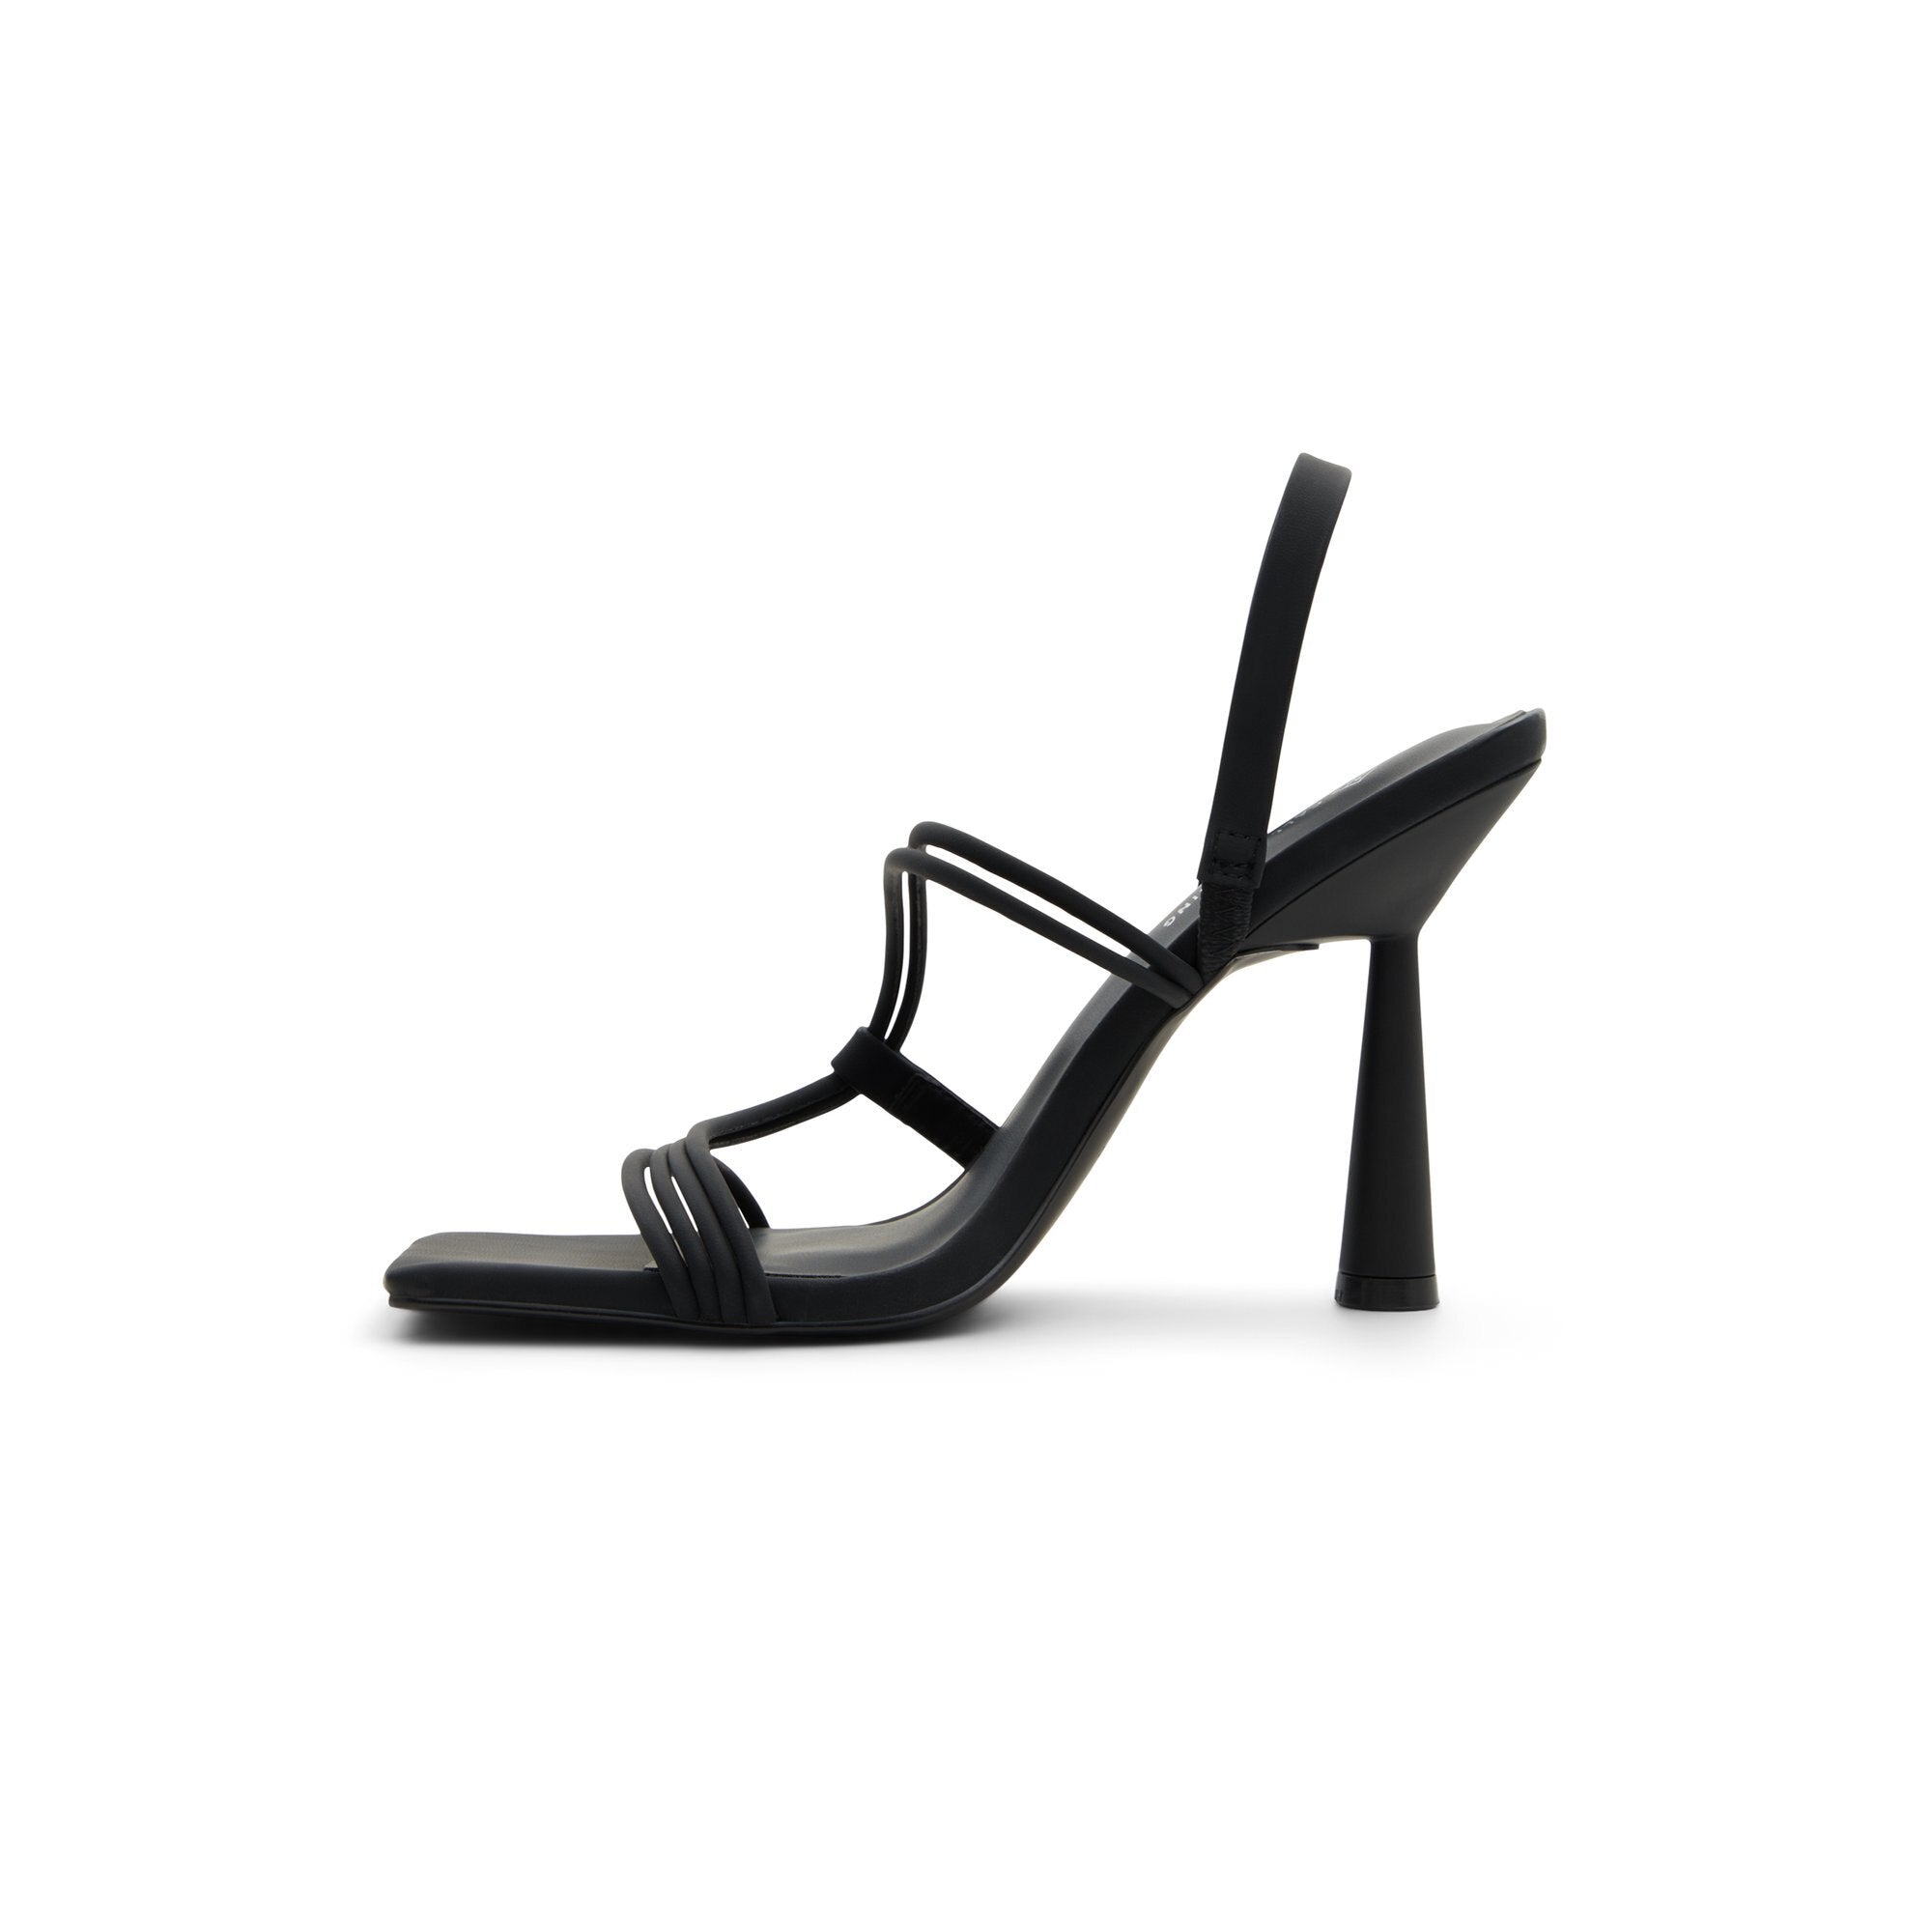 Strappy Heel Sandals - Women's spring shoes